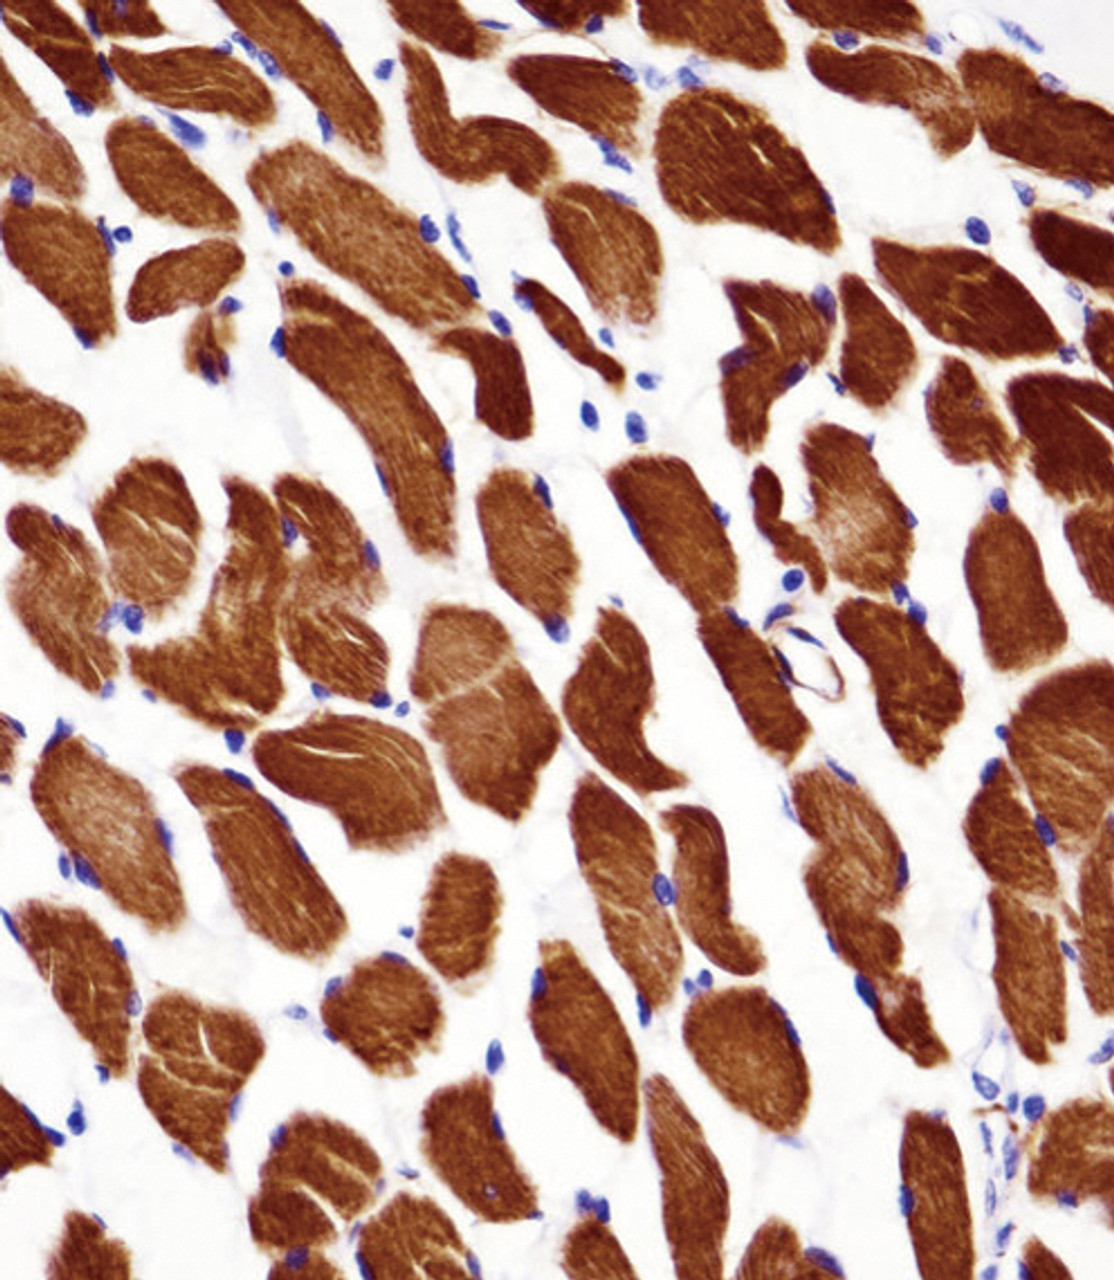 ACTA1/alpha -actin Antibody immunohistochemistry analysis in formalin fixed and paraffin embedded human skeletal muscle followed by peroxidase conjugation of the secondary antibody and DAB staining.